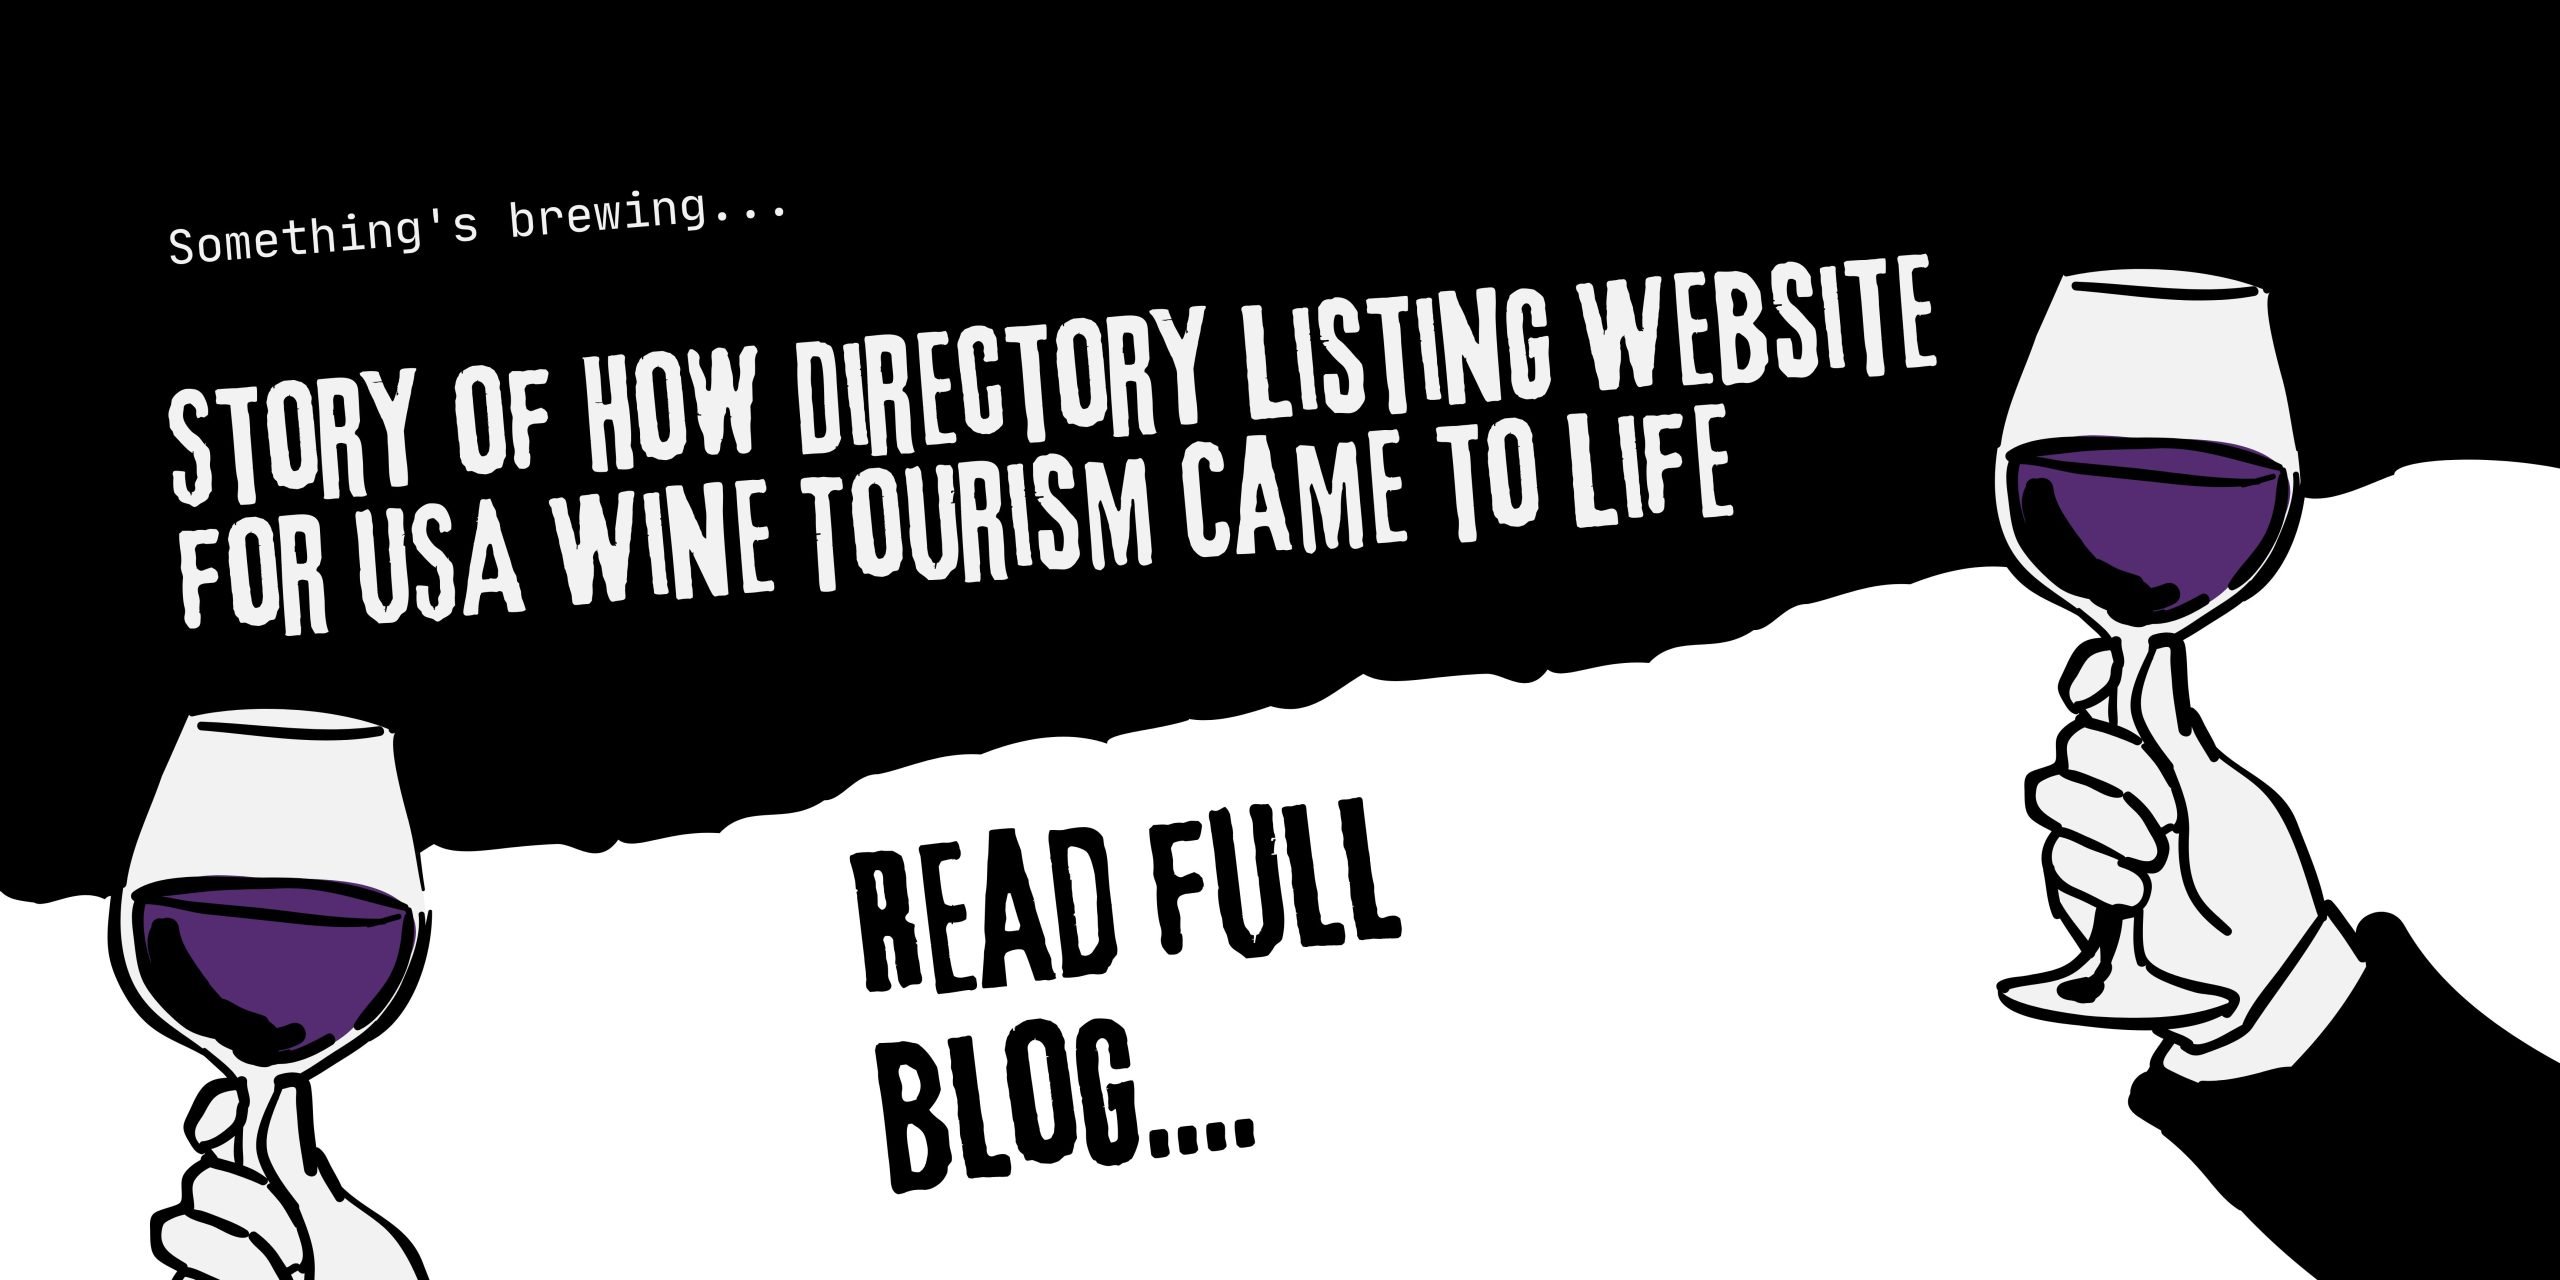 Story of How Directory Listing Website for USA Wine Tourism Came to Life